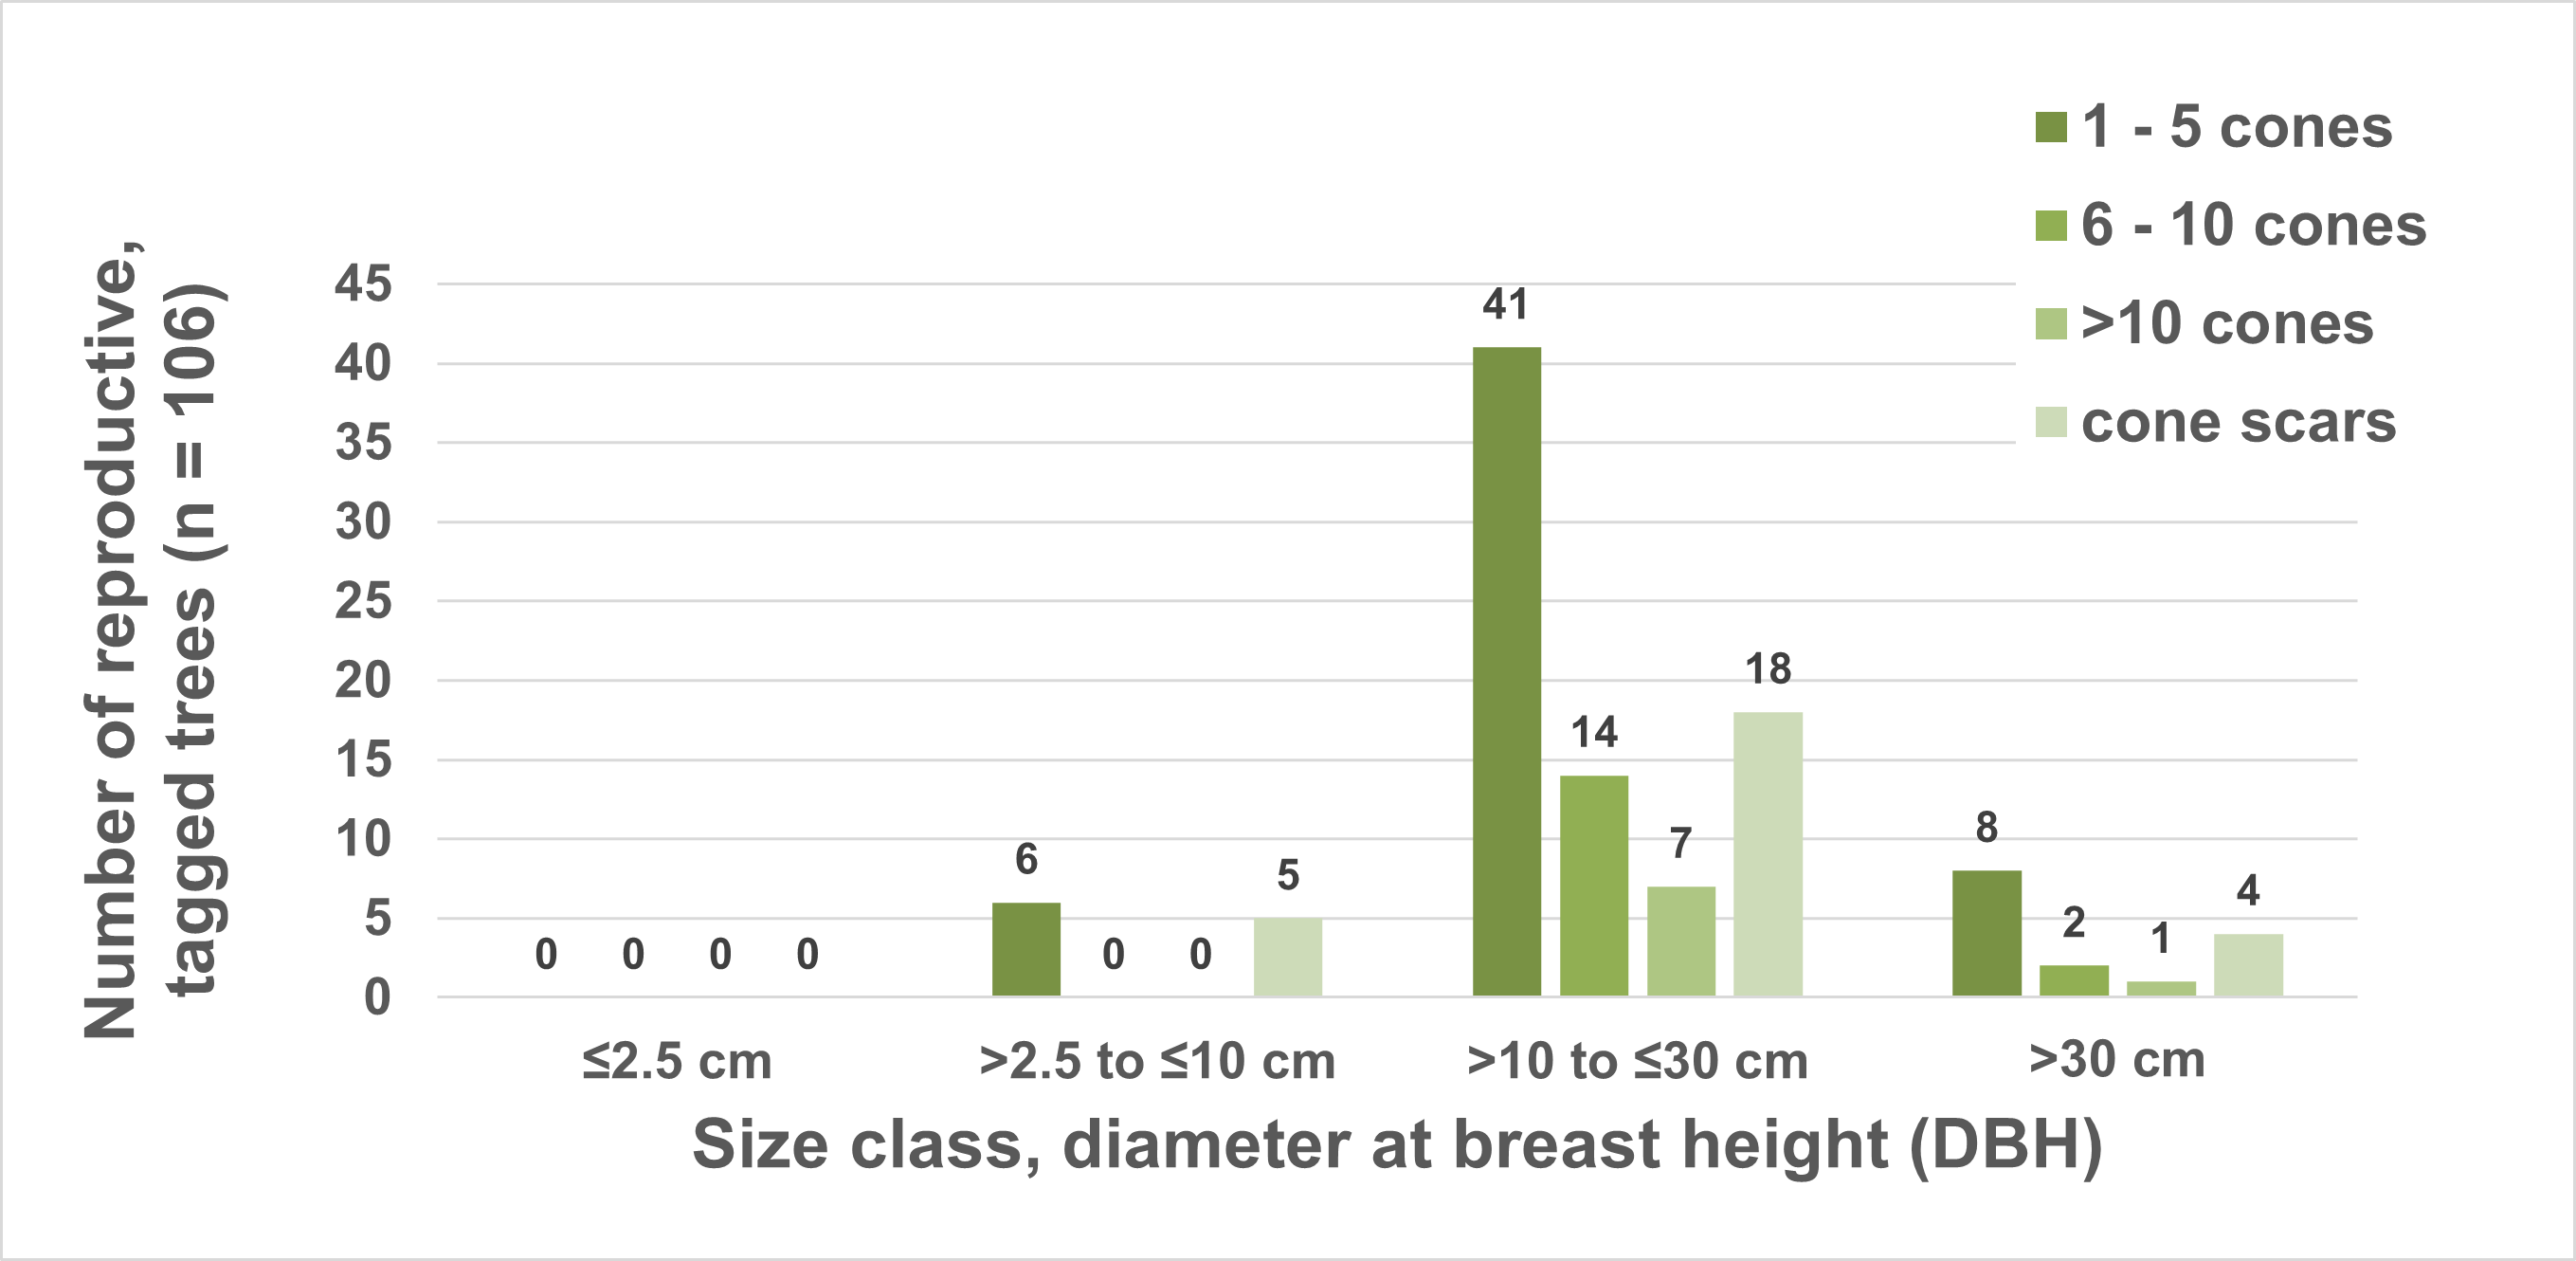 Graph of cone-producing whitebark pine trees by size class, showing the majority in the 10-30 cm dbh size class.